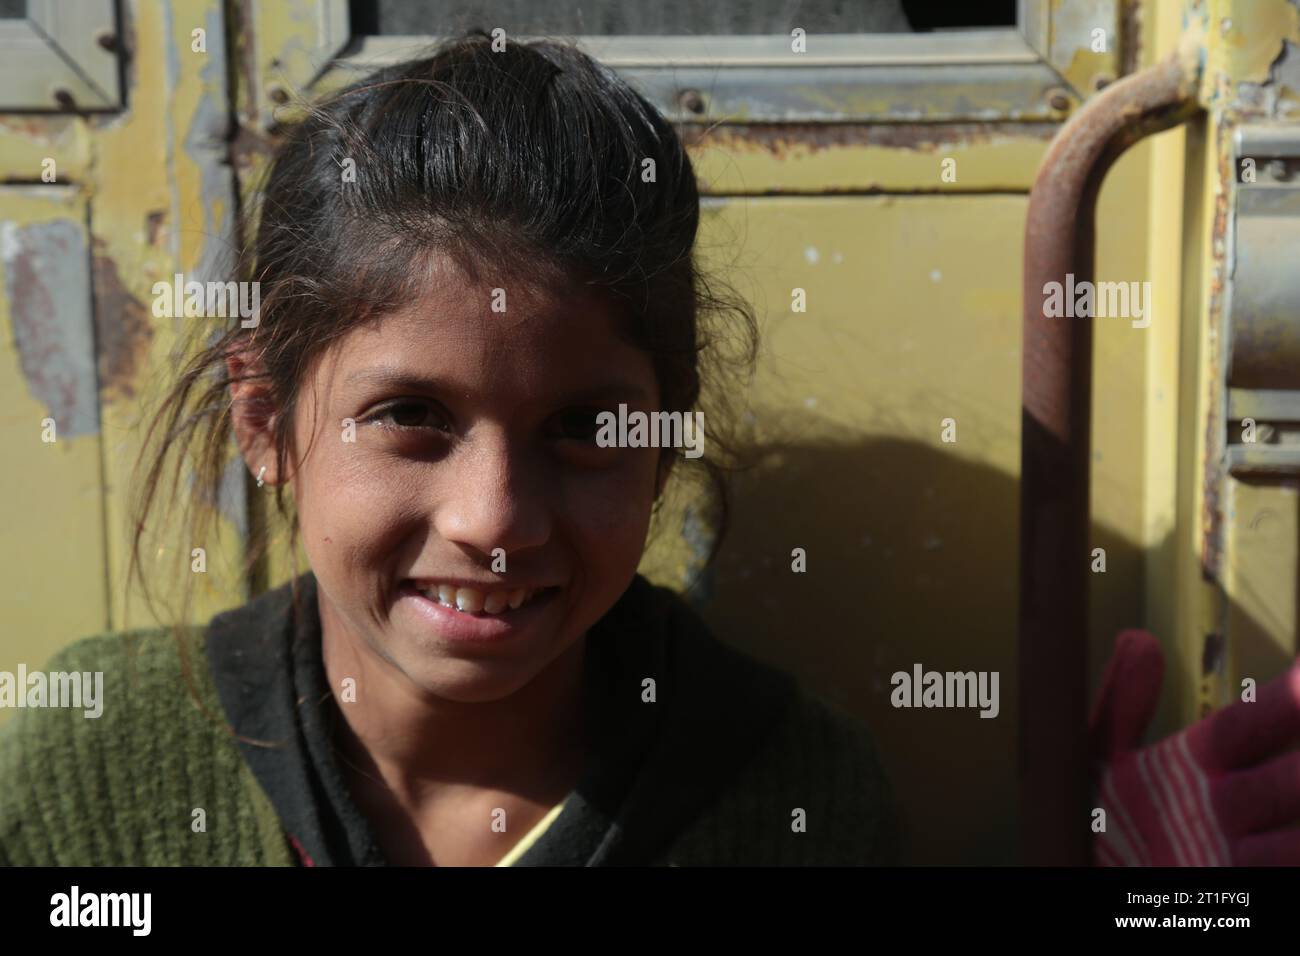 Beer Chhapar Rural, Rajasthan, India - January 18, 2017: Young Indian girl outside the yellow train door. Portrait Stock Photo